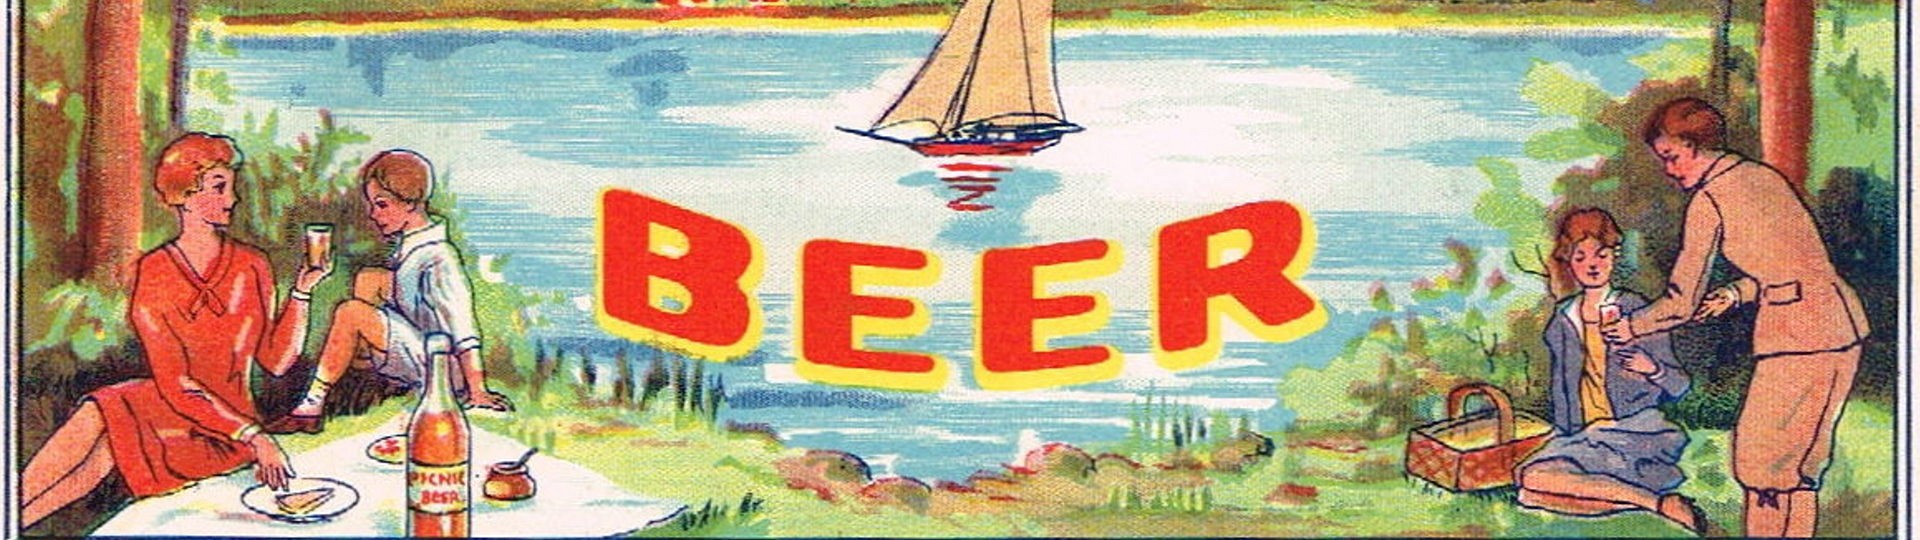 TavernTrove's Wednesday Evening Vintage ILLINOIS Beer Label and Coaster Auction #7 by TavernTrove